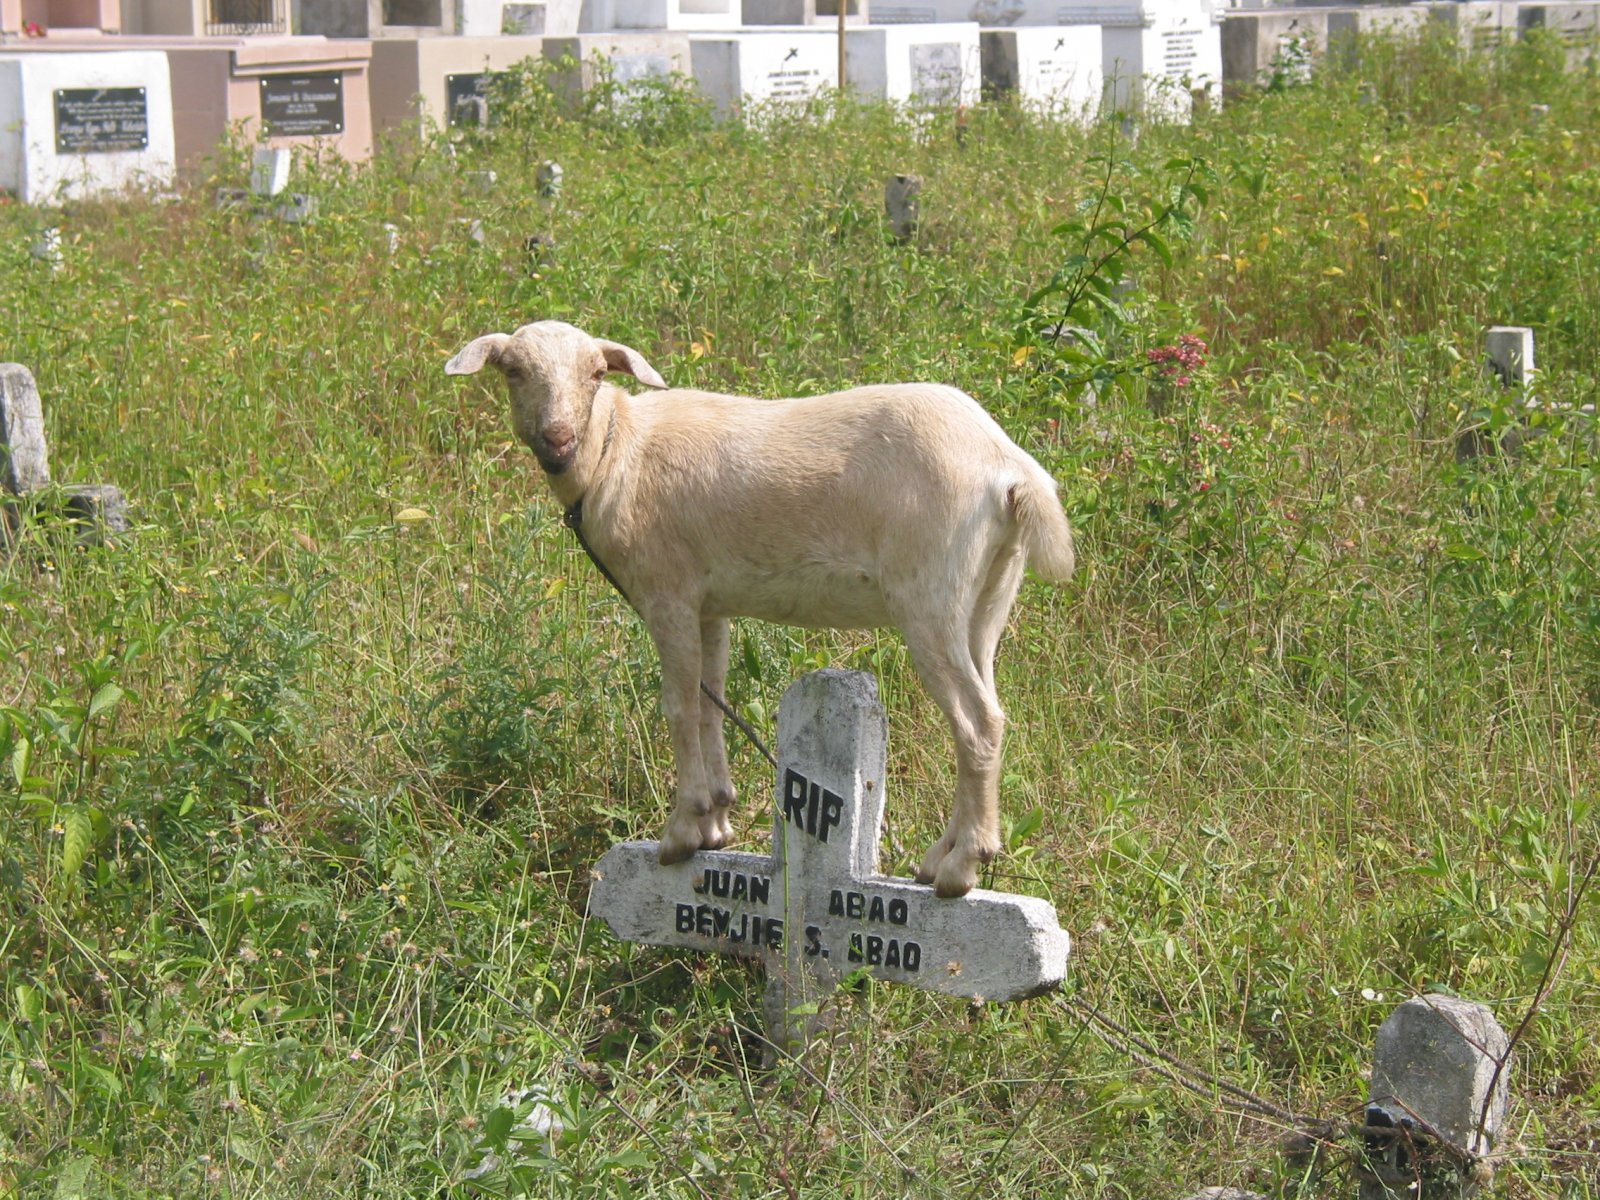 There was a sheep in the cemetery. Of course, it was cream white. Photo by libudsuroy. Creative Commons.